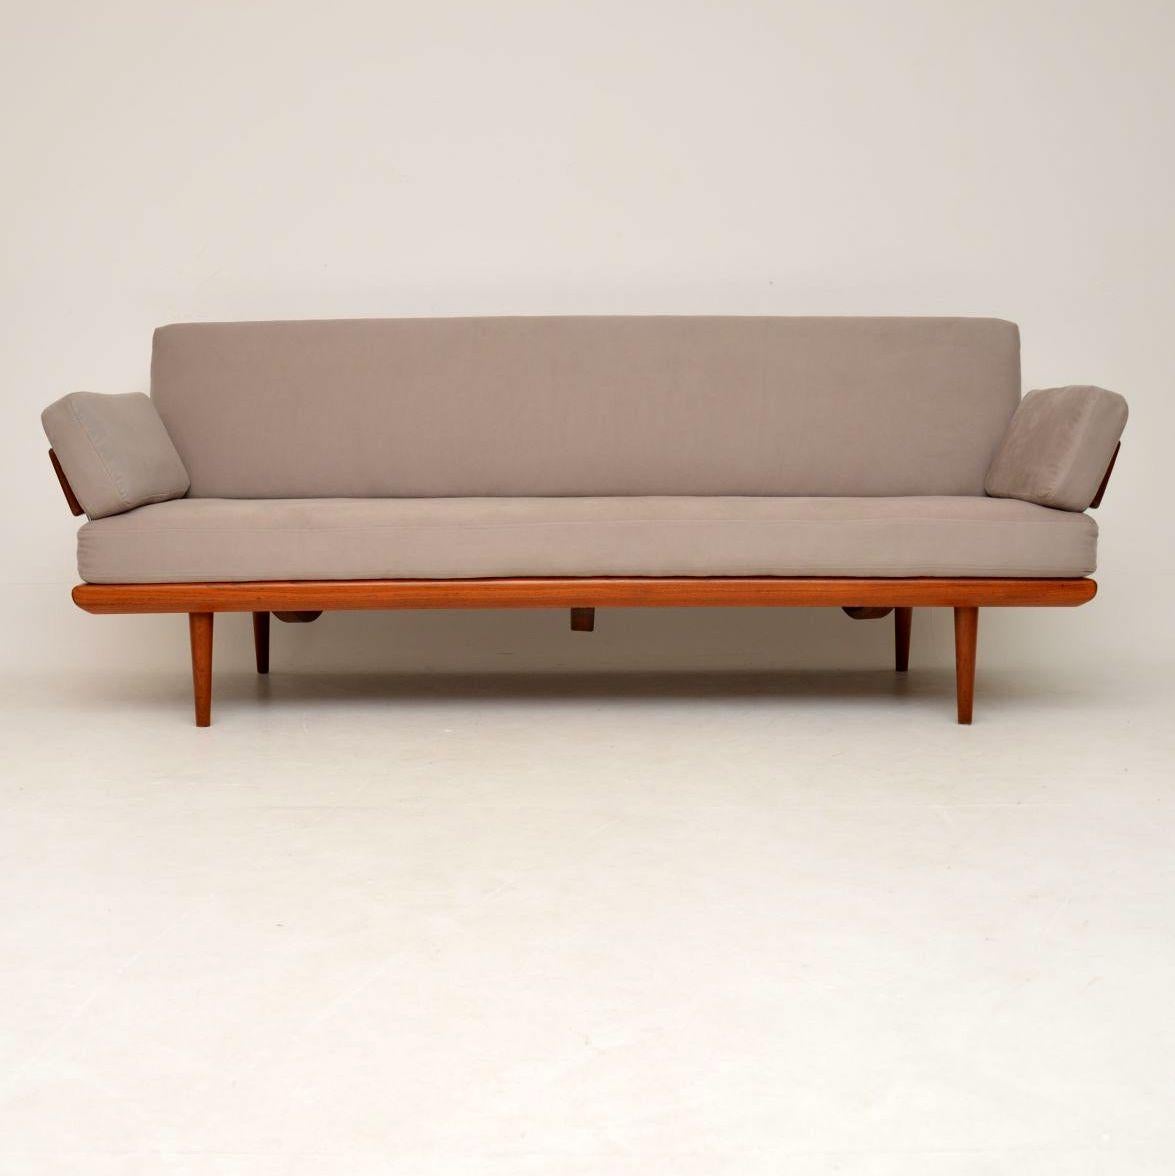 A stunning and extremely comfortable sofa designed by Peter Hvidt and Orla Molgaard Nielsen, this is an early model dating from the 1950s. It was made by France & Daverkosen, it retains the original badge under the seat cushion. We have had the